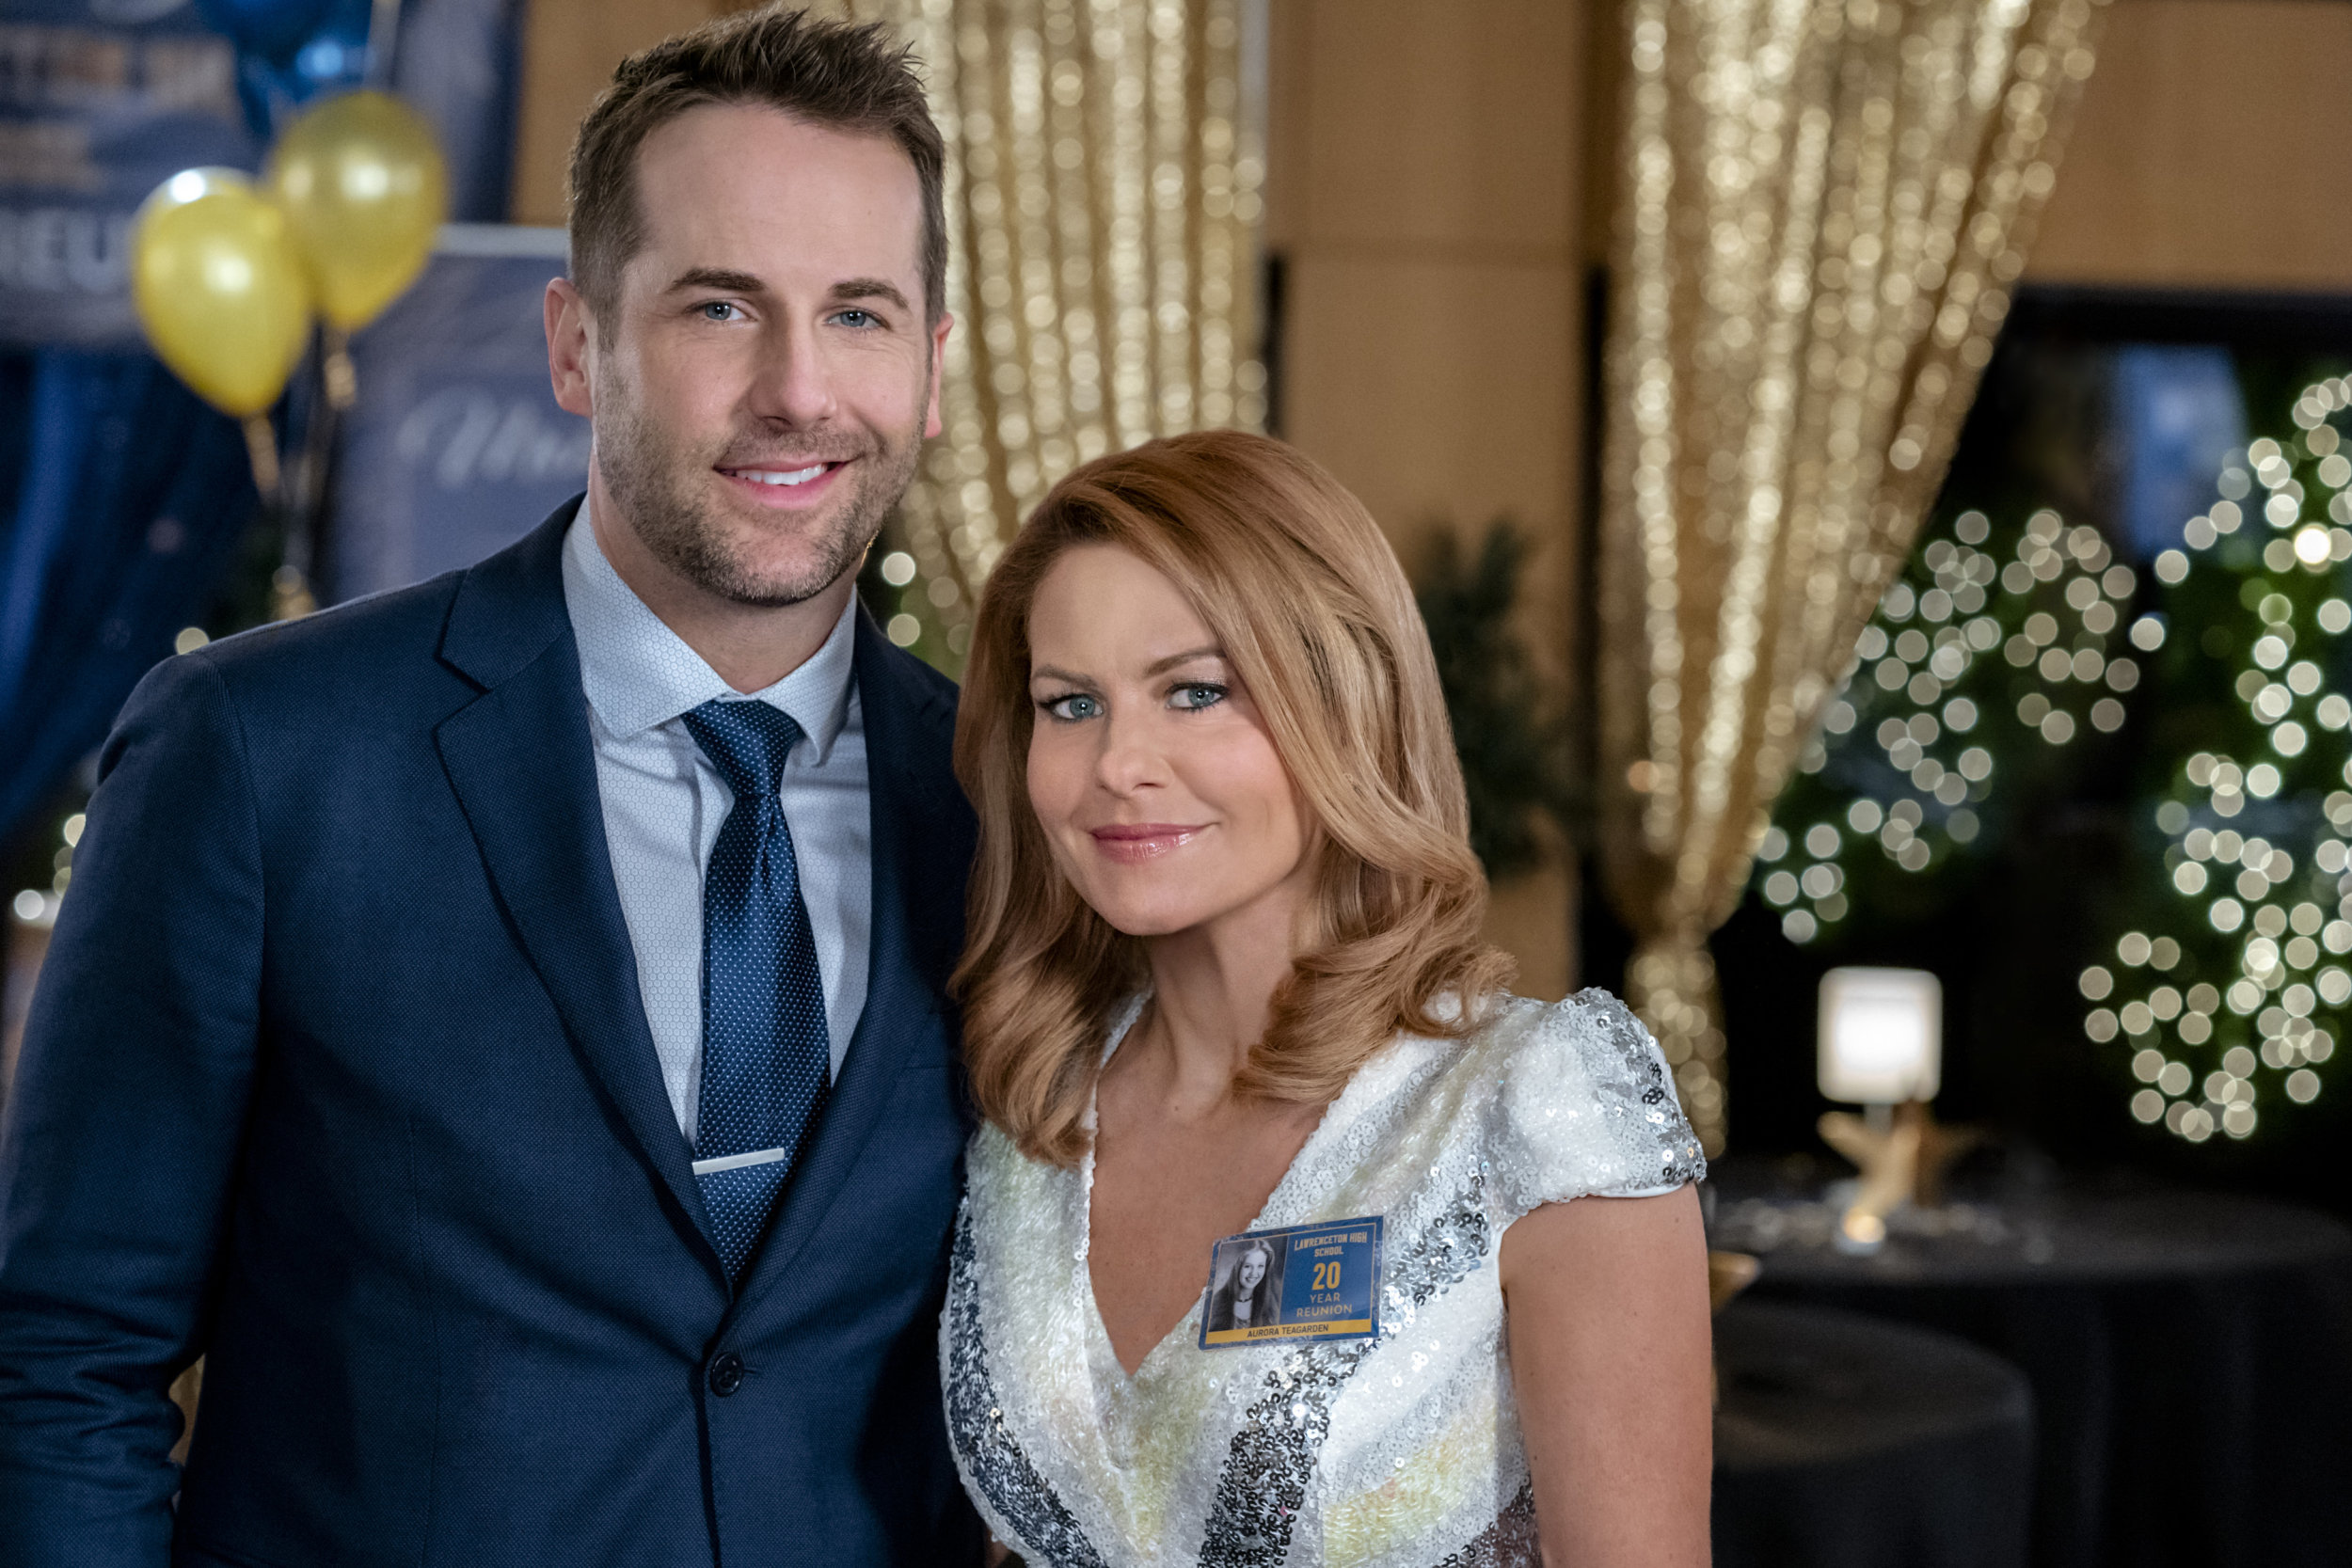 Watch Aurora Teagarden Mysteries: Reunited and it Feels So Deadly